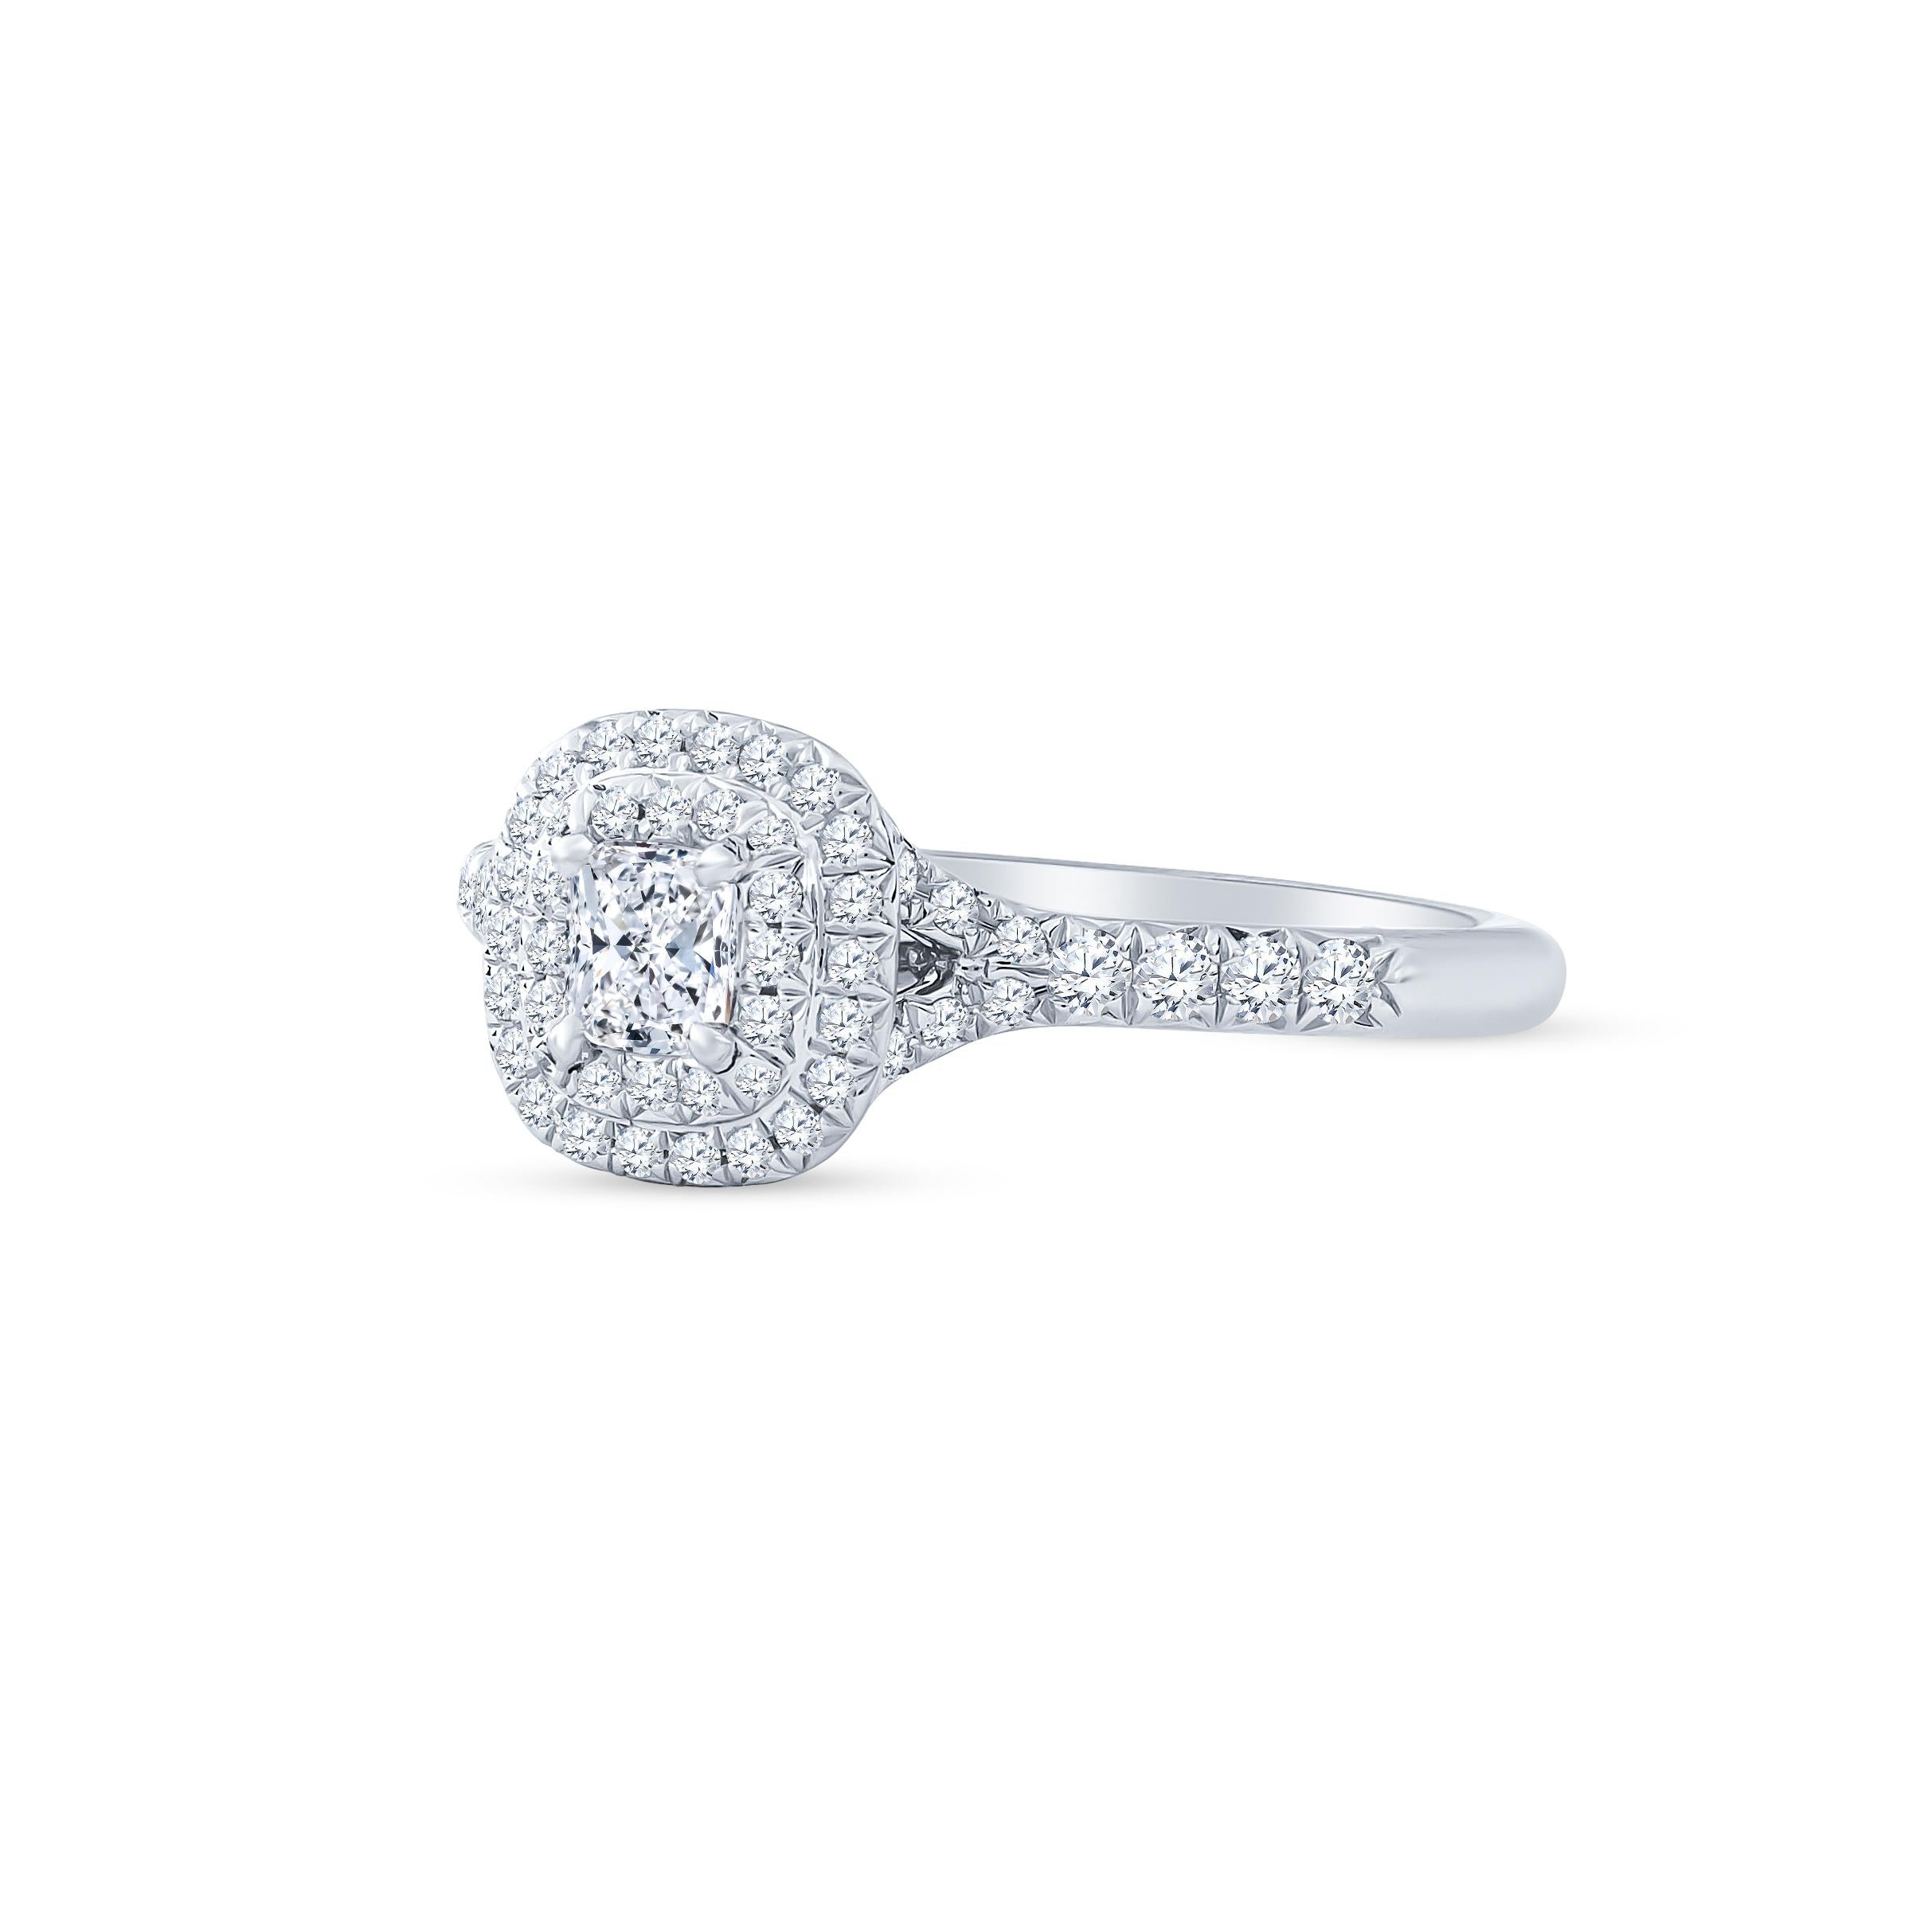 Dazzling Tiffany & Co. Soleste engagement ring that features a fine 0.24 carat cushion cut diamond that is beautifully surrounded by 0.32 carats of round brilliant cut diamonds set in double halo form and upper shoulders of the band. The ring was